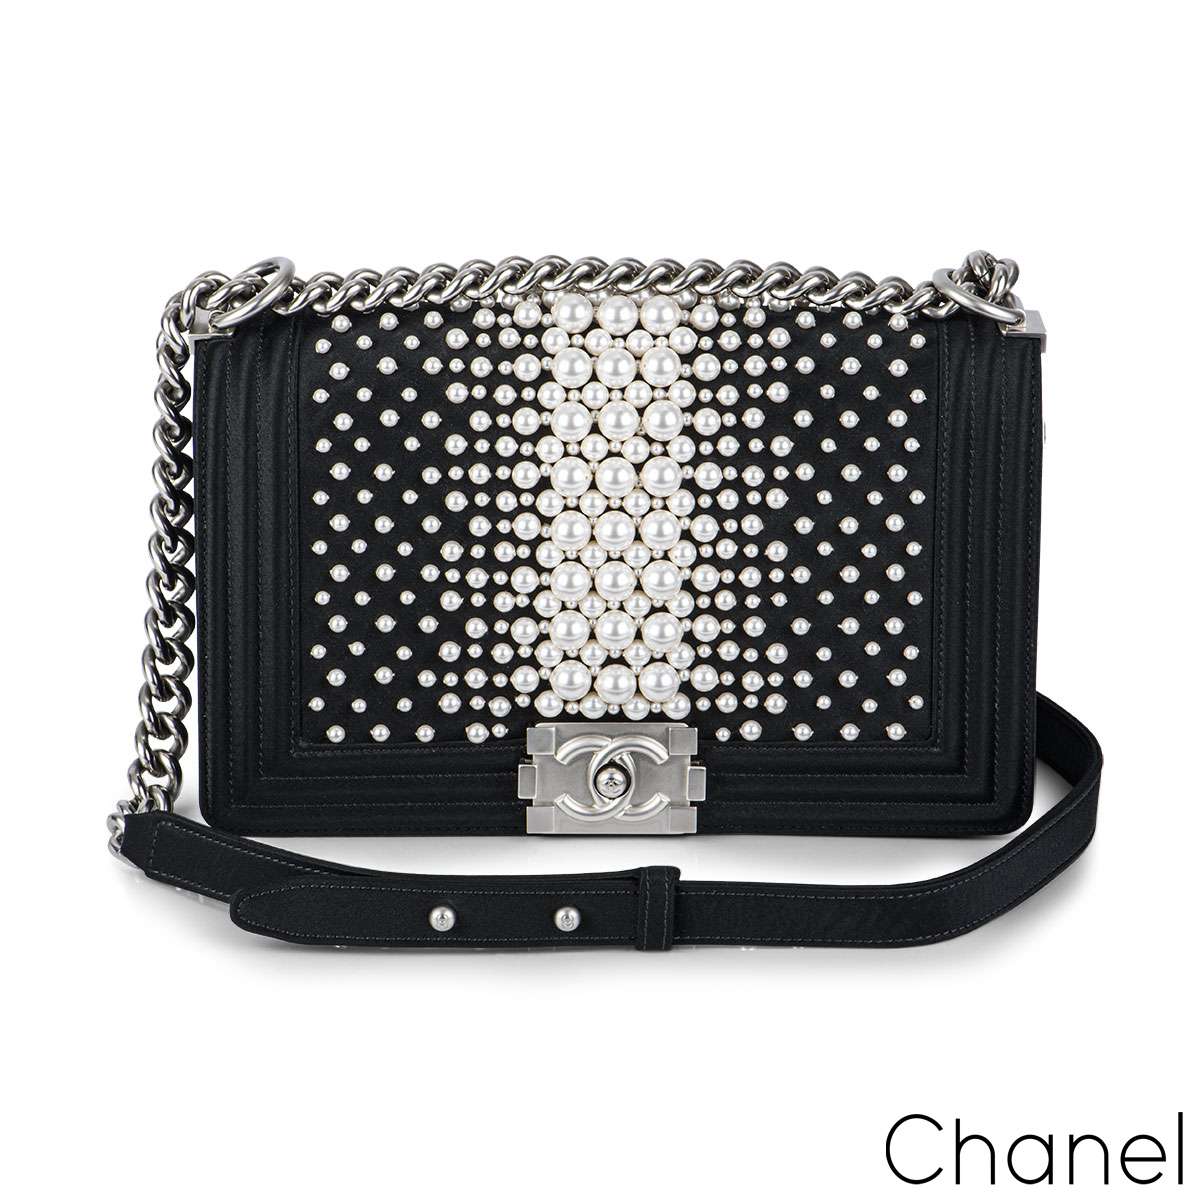 Authentic Chanel Limited Edition Bags  Baghunter